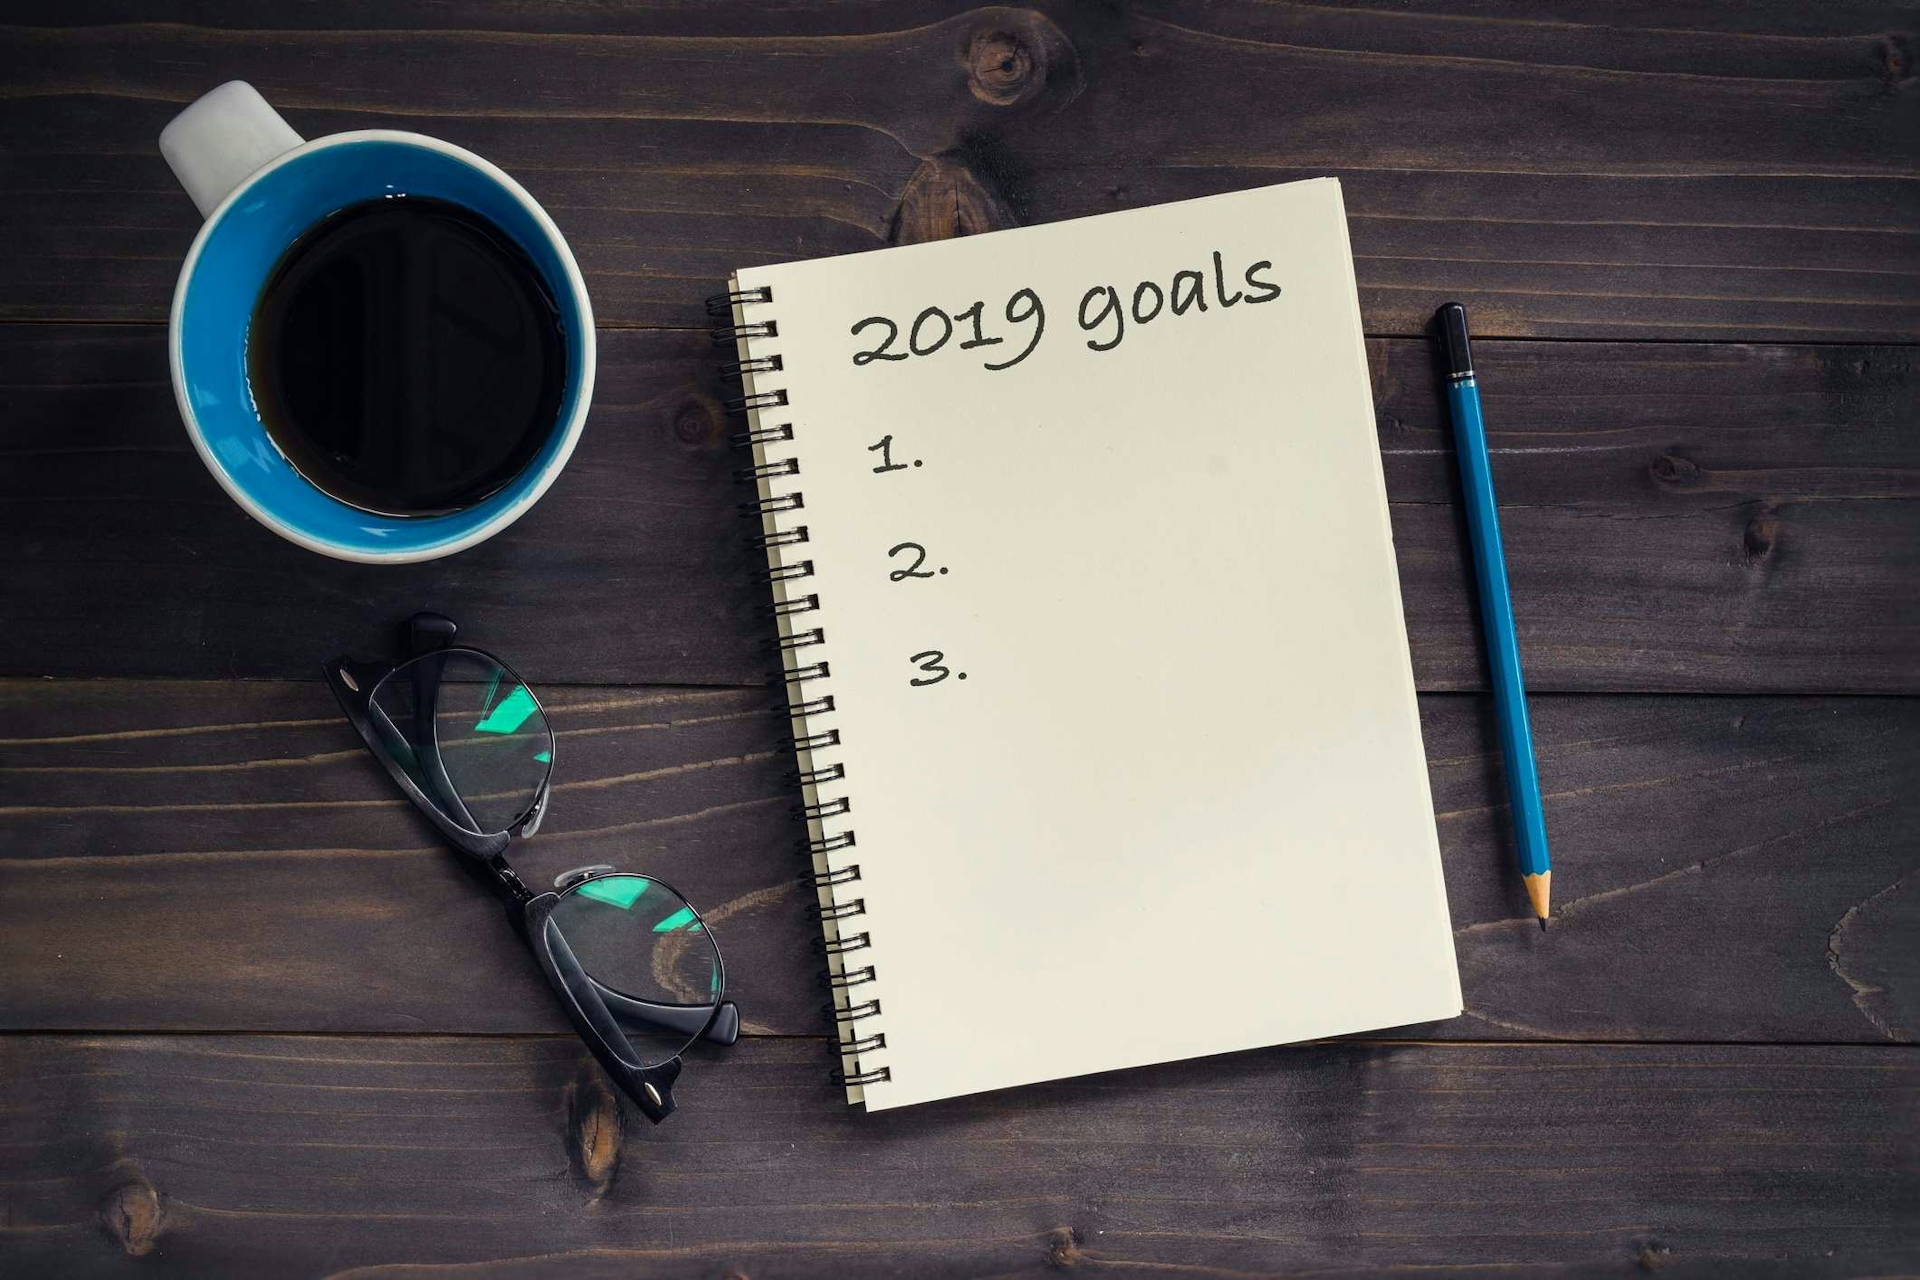 Enterprise Nation members' new year resolutions for 2019